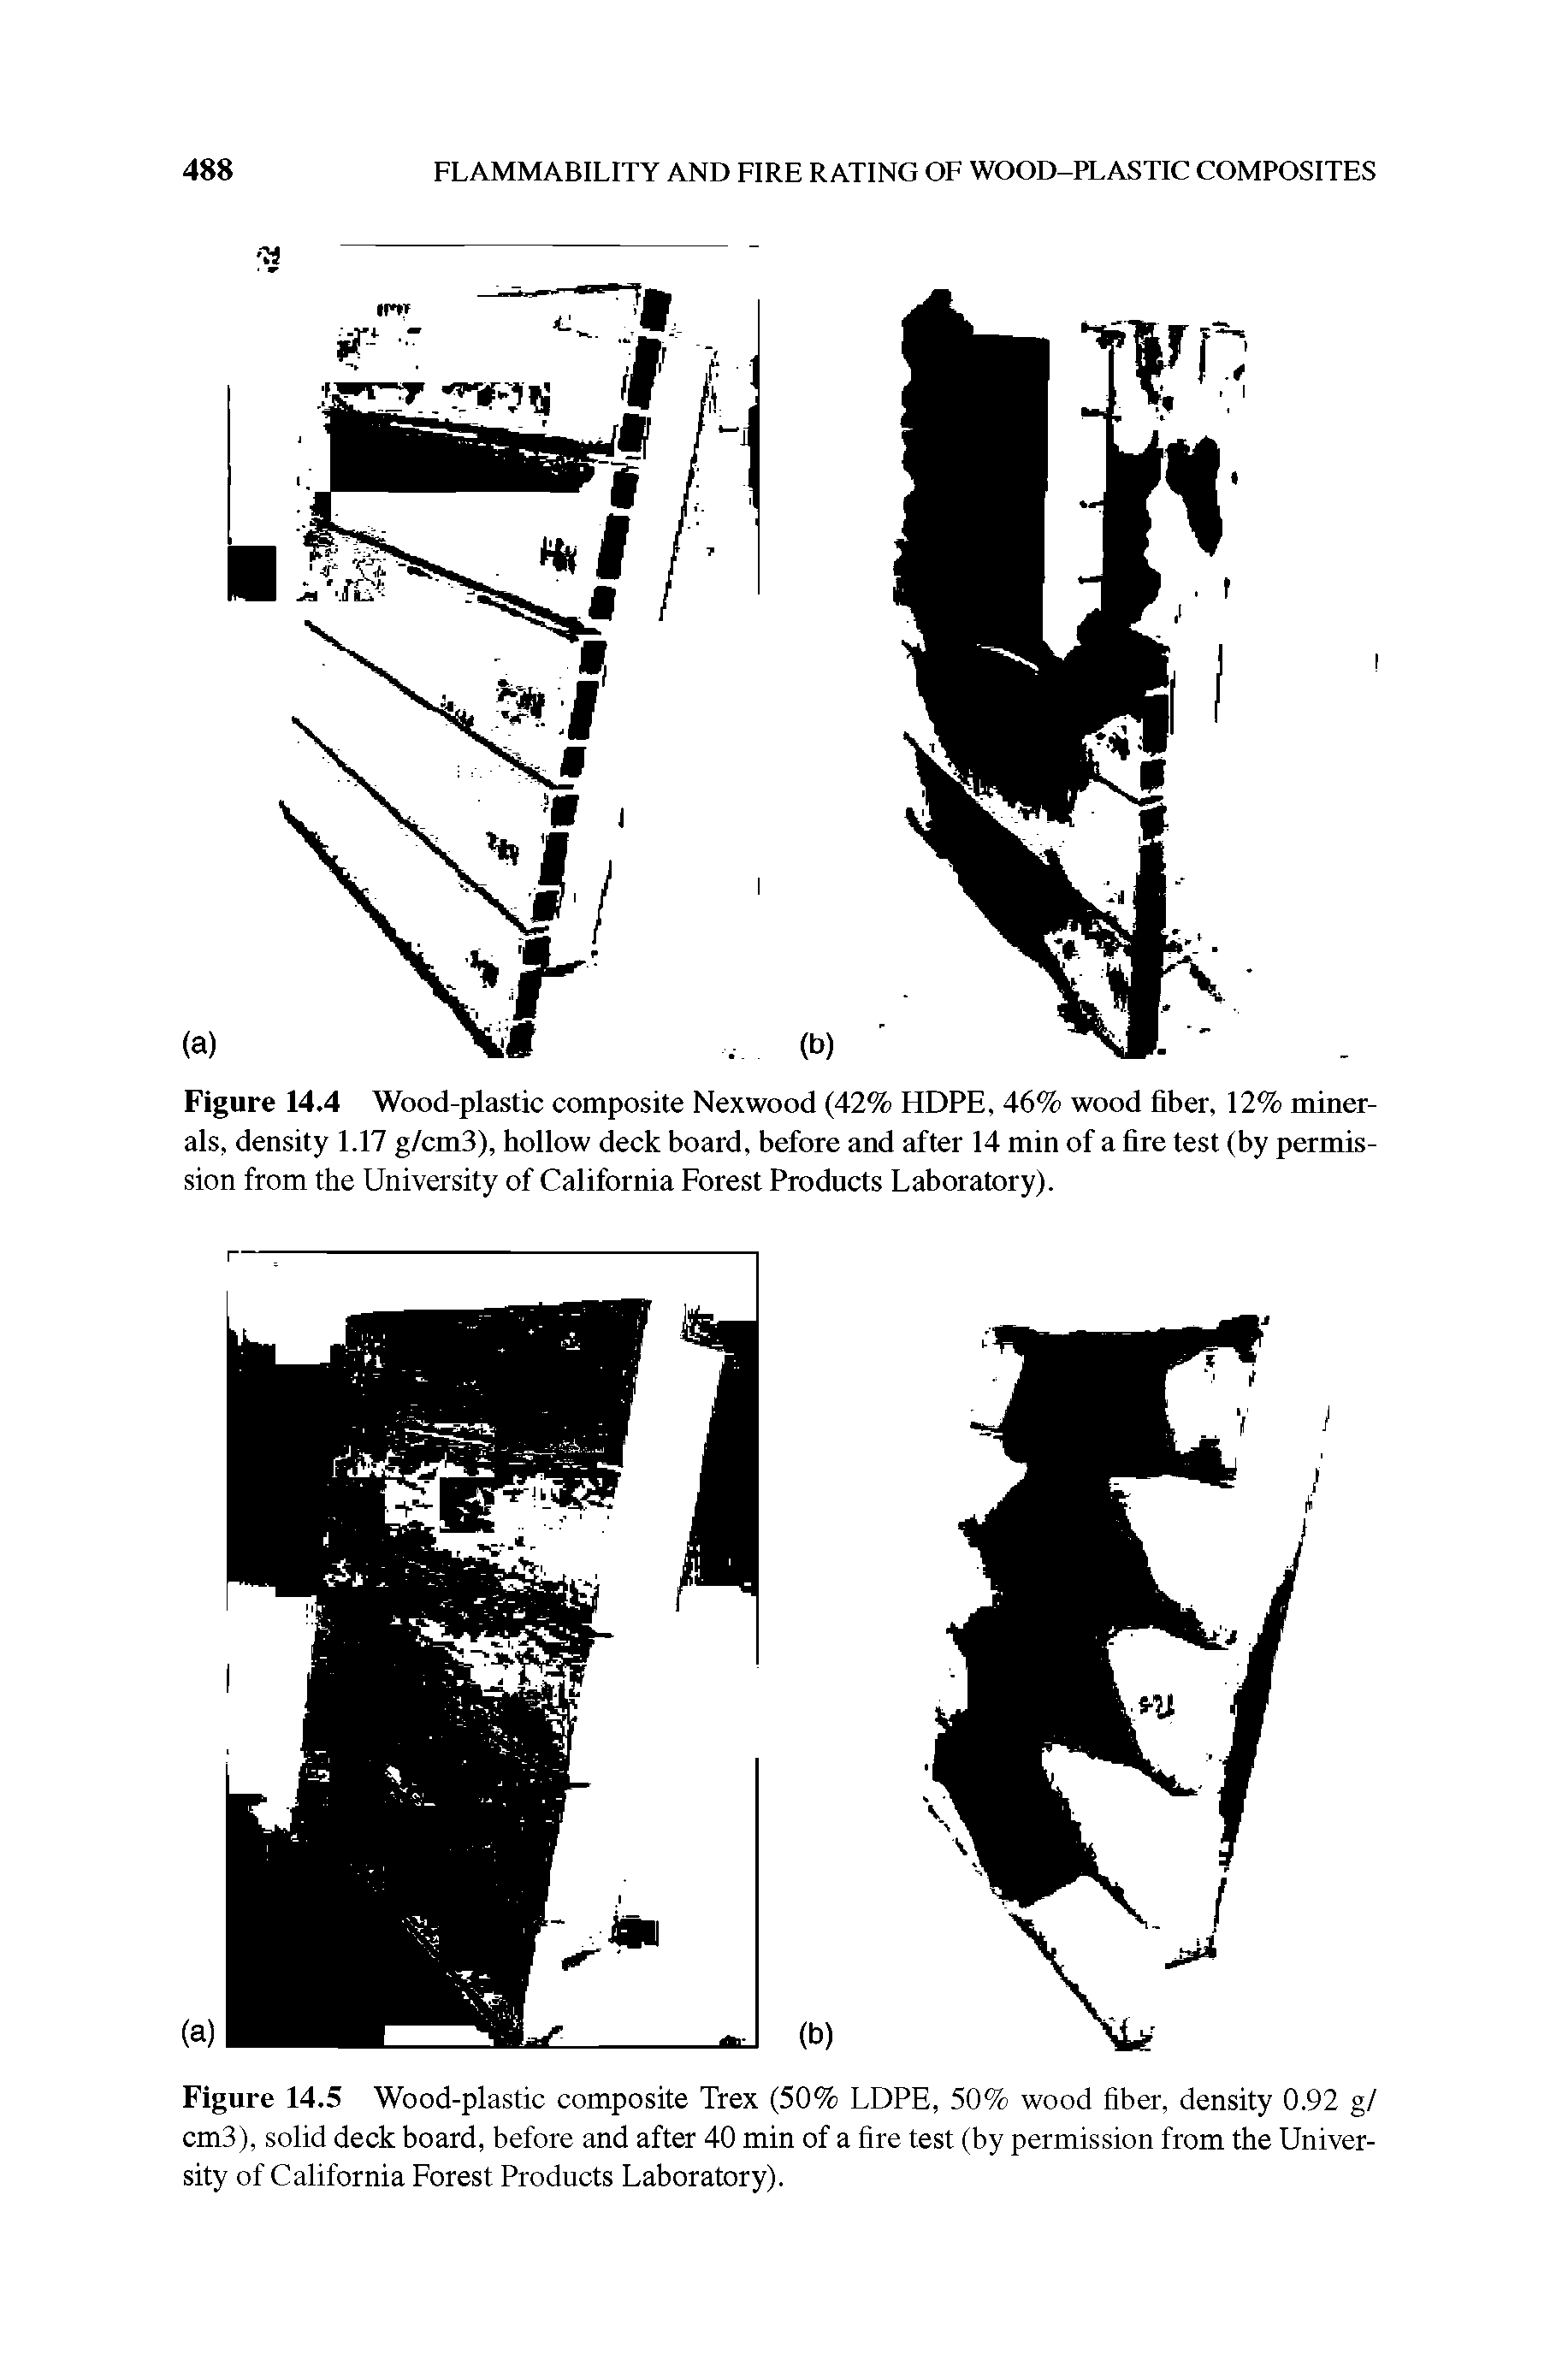 Figure 14.4 Wood-plastic composite Nexwood (42% HDPE, 46% wood fiber, 12% minerals, density 1.17 g/cm3), hollow deck board, before and after 14 min of a fire test (by permission from the University of California Forest Products Laboratory).